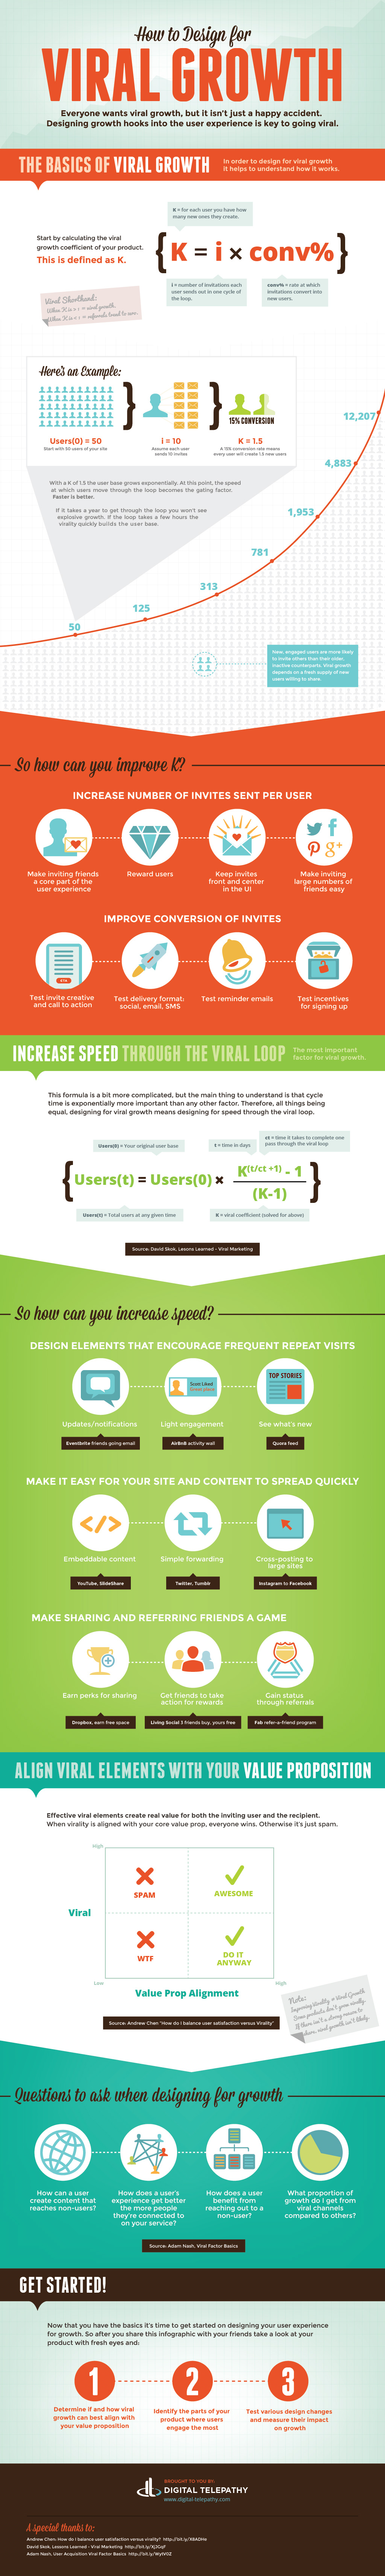 Design for Viral Growth Infographic